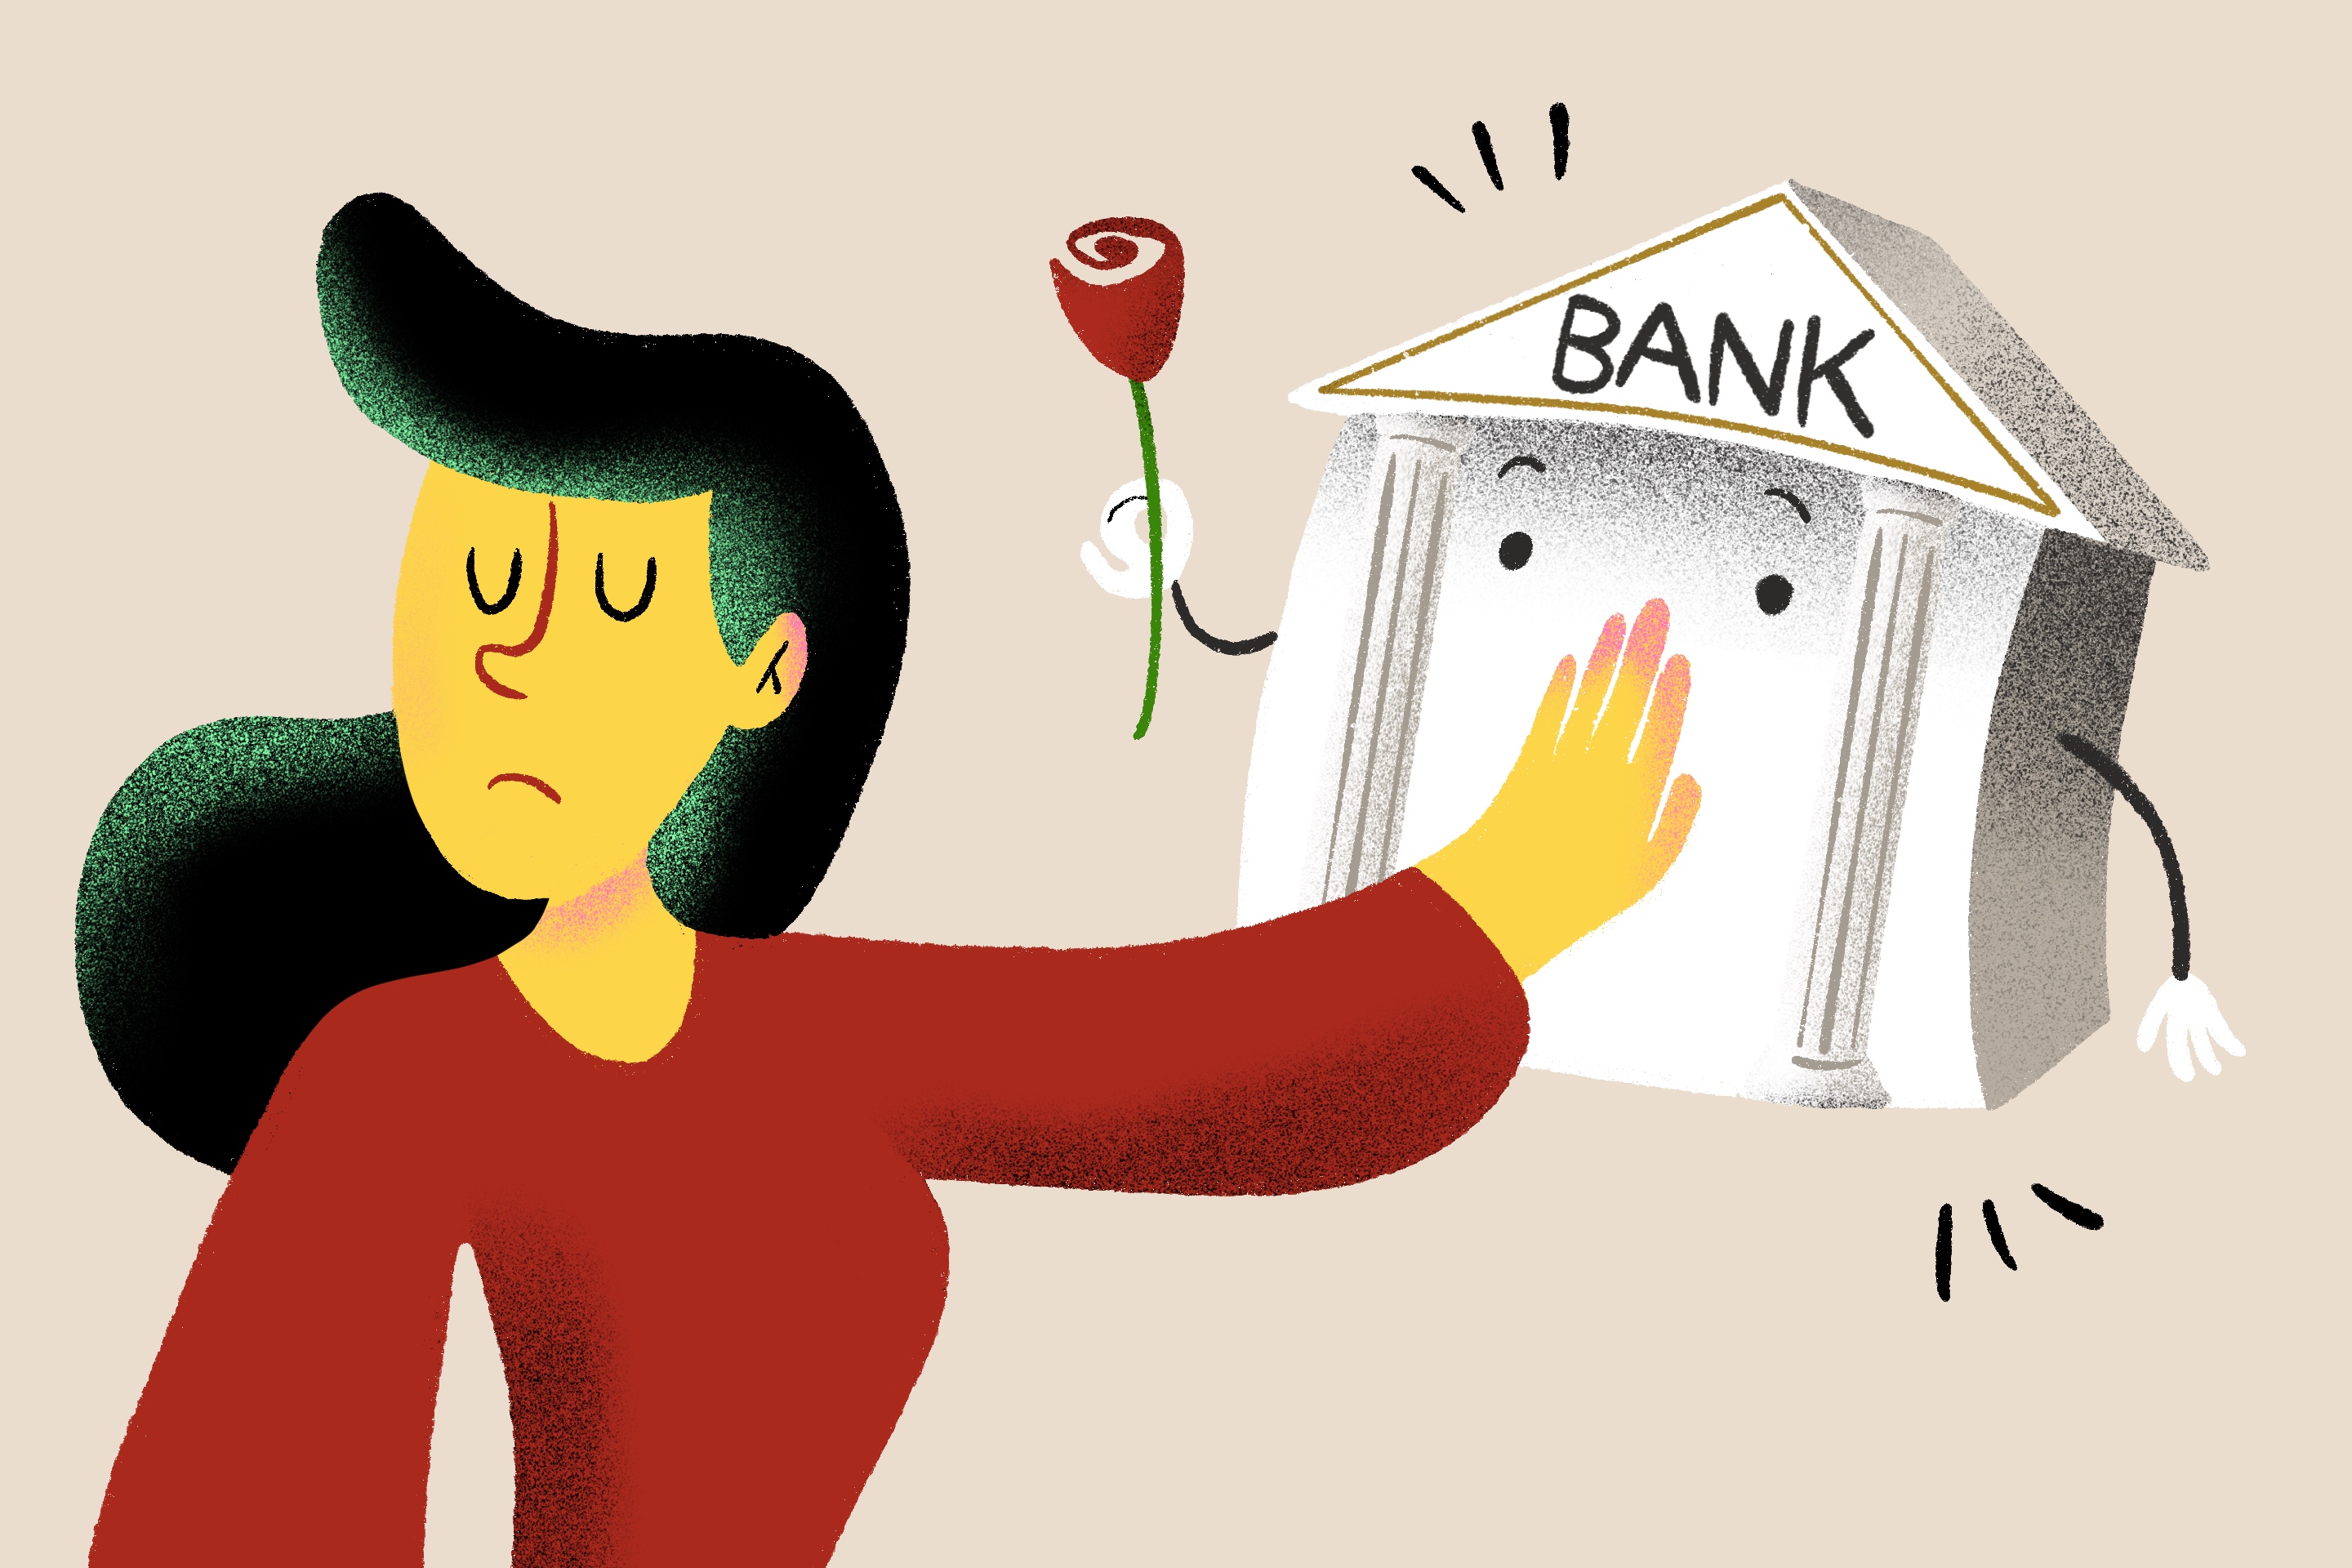 Will Your Bank Raise Your Savings Rate if You Threaten to Leave?